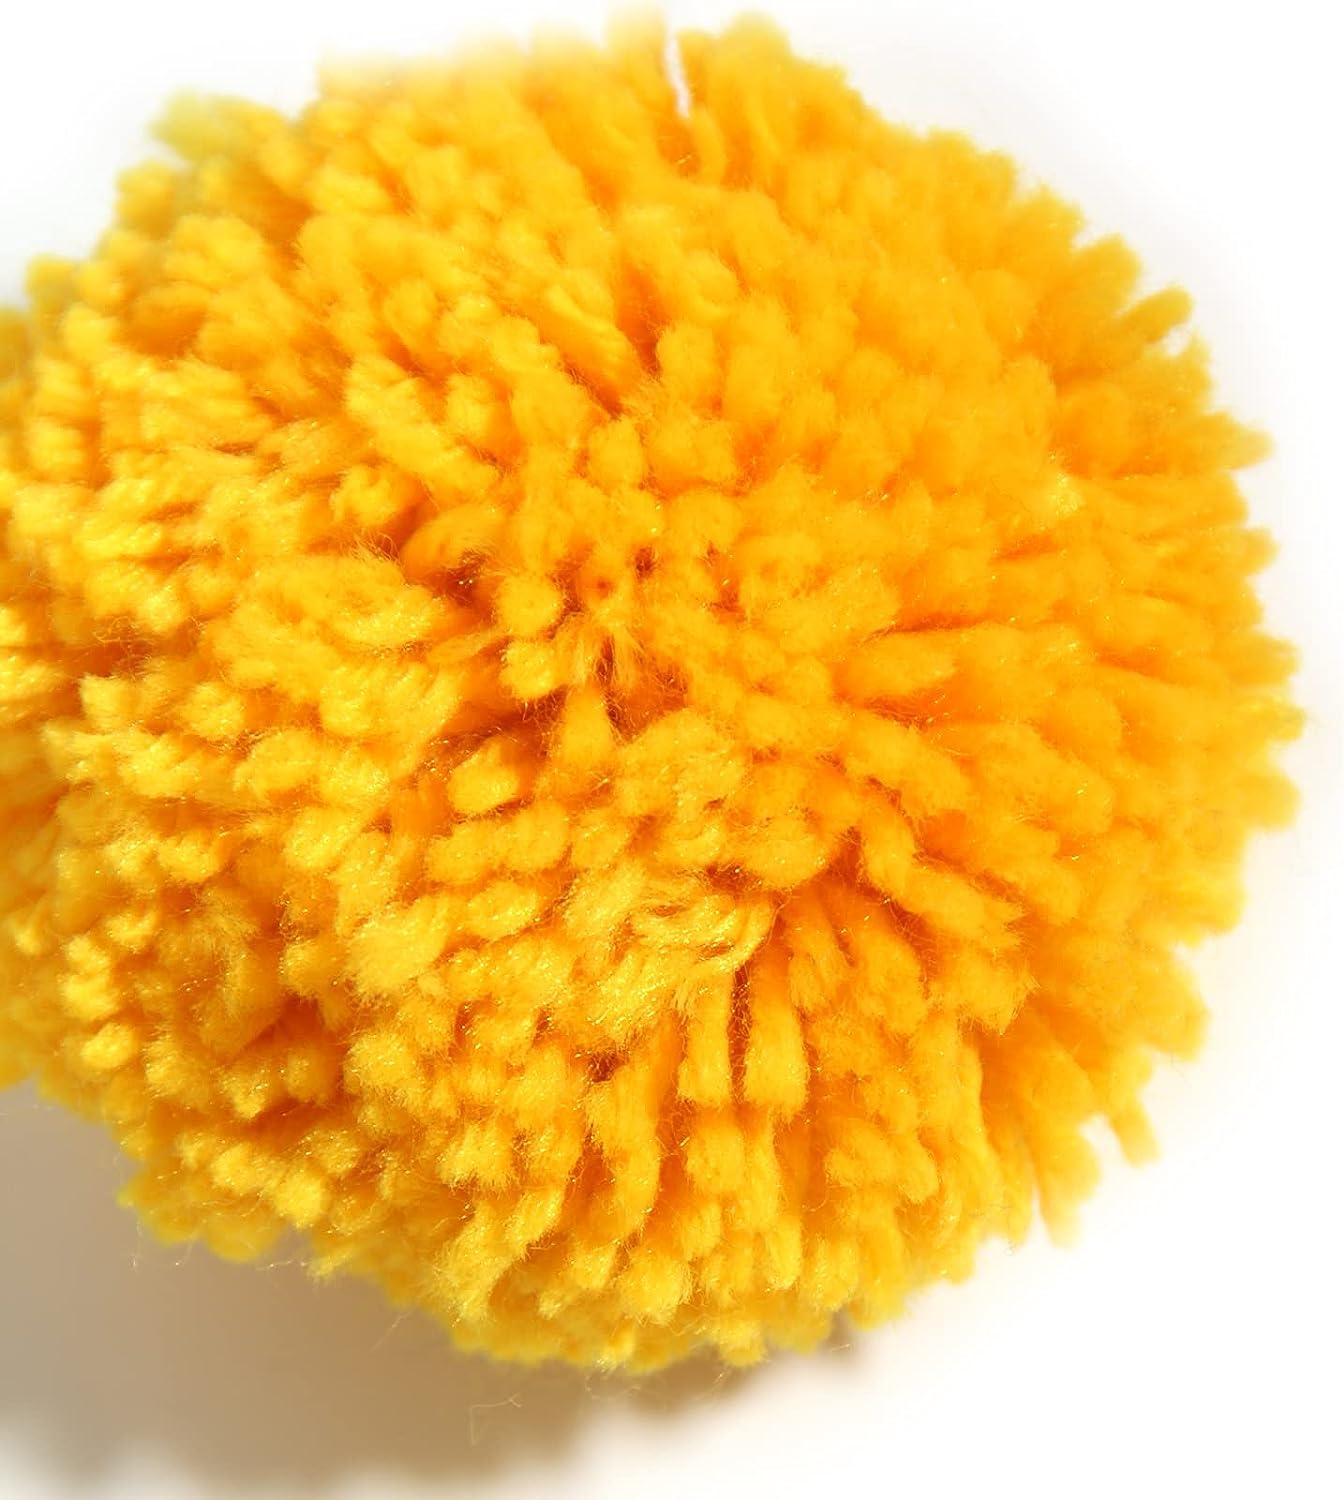 10 Pcs Large Yarn Pom Poms-3 Inch Made to Order Acrylic Yarn Balls for Hats  Or Party Decorations-DIY Craft Pompoms (Mixed 3inch) Mixed 3inch